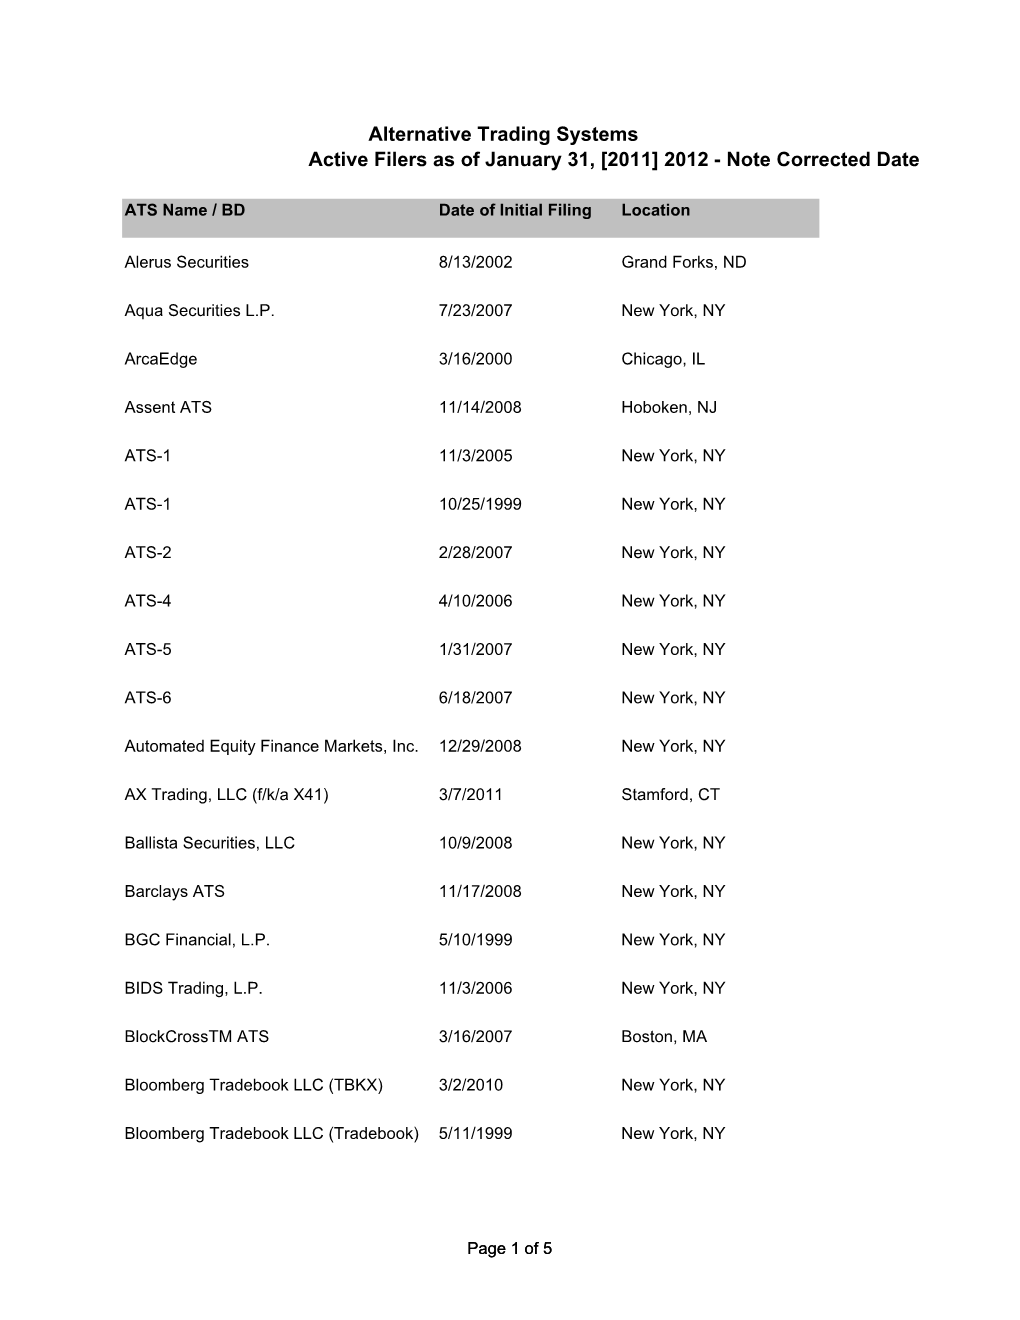 Alternative Trading Systems Active Filers As of January 31, [2011] 2012 - Note Corrected Date